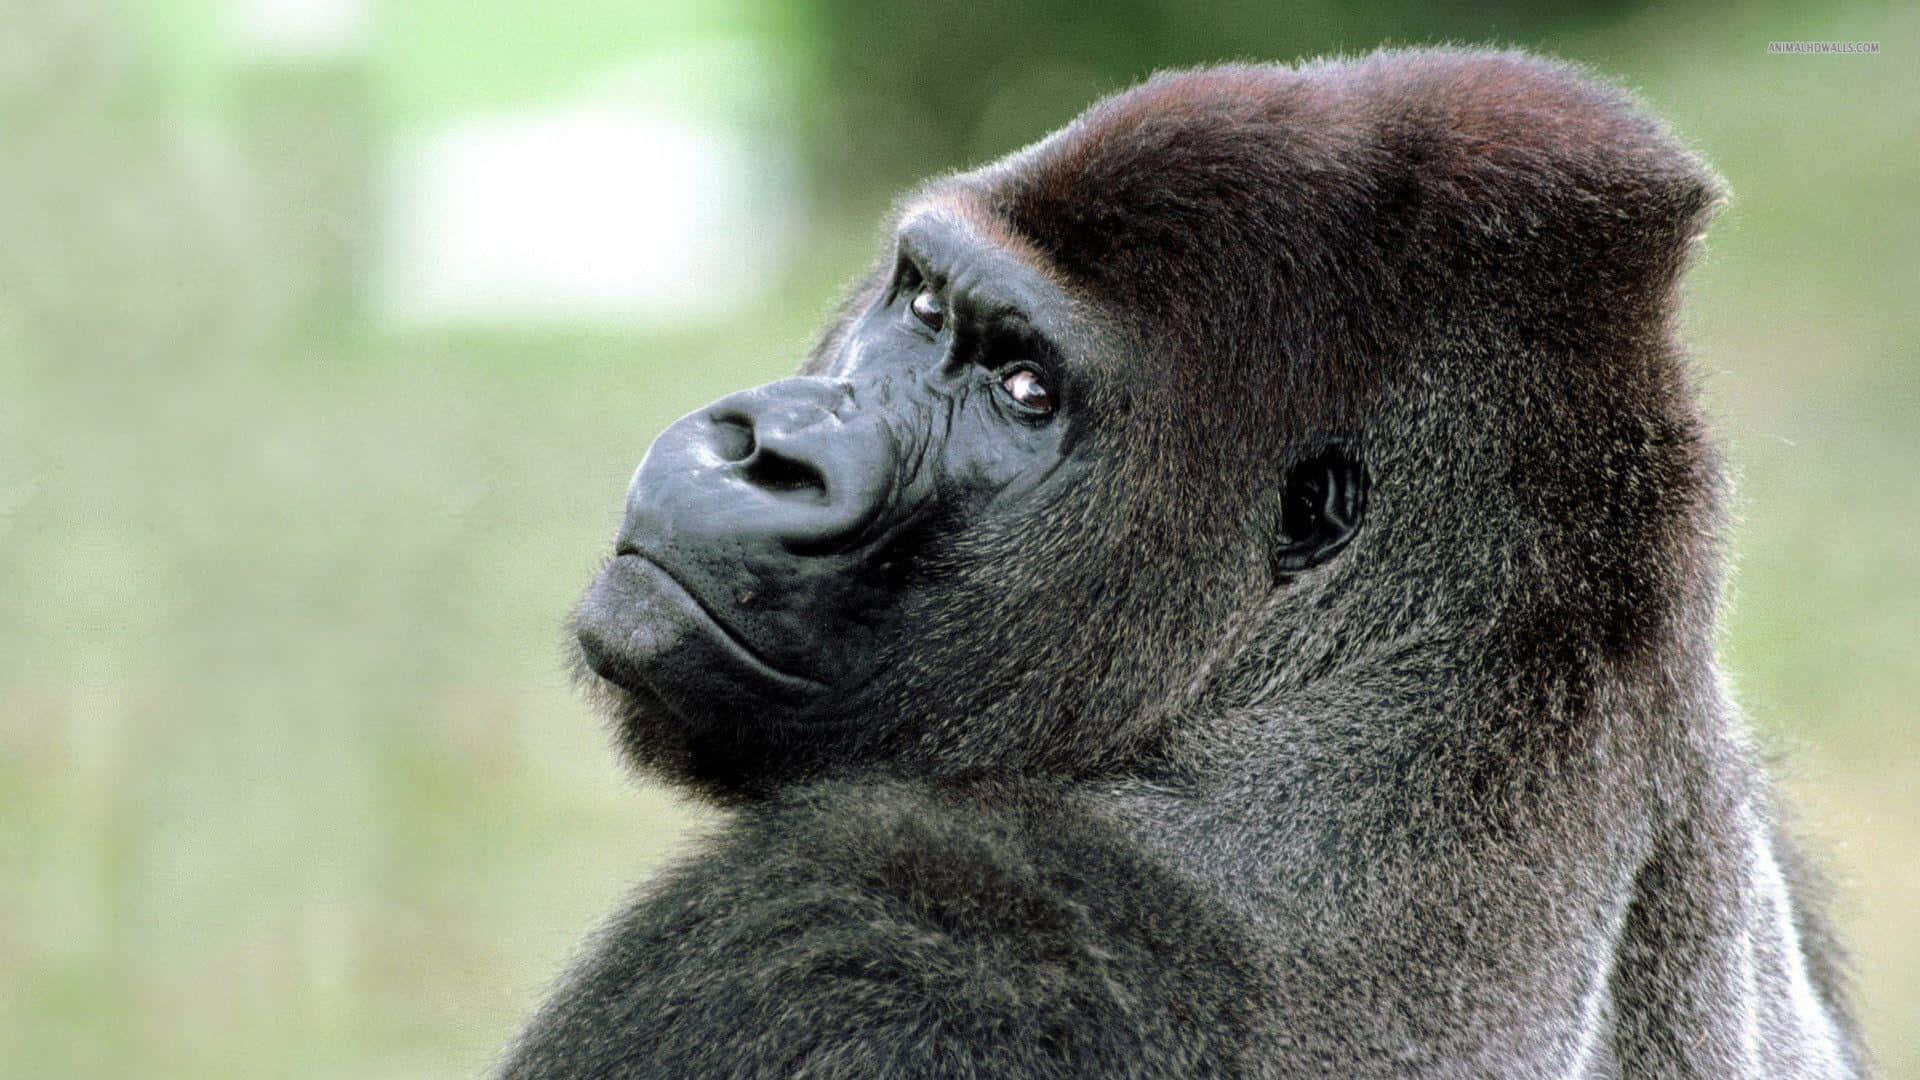 A Gorilla Is Looking At The Camera Wallpaper